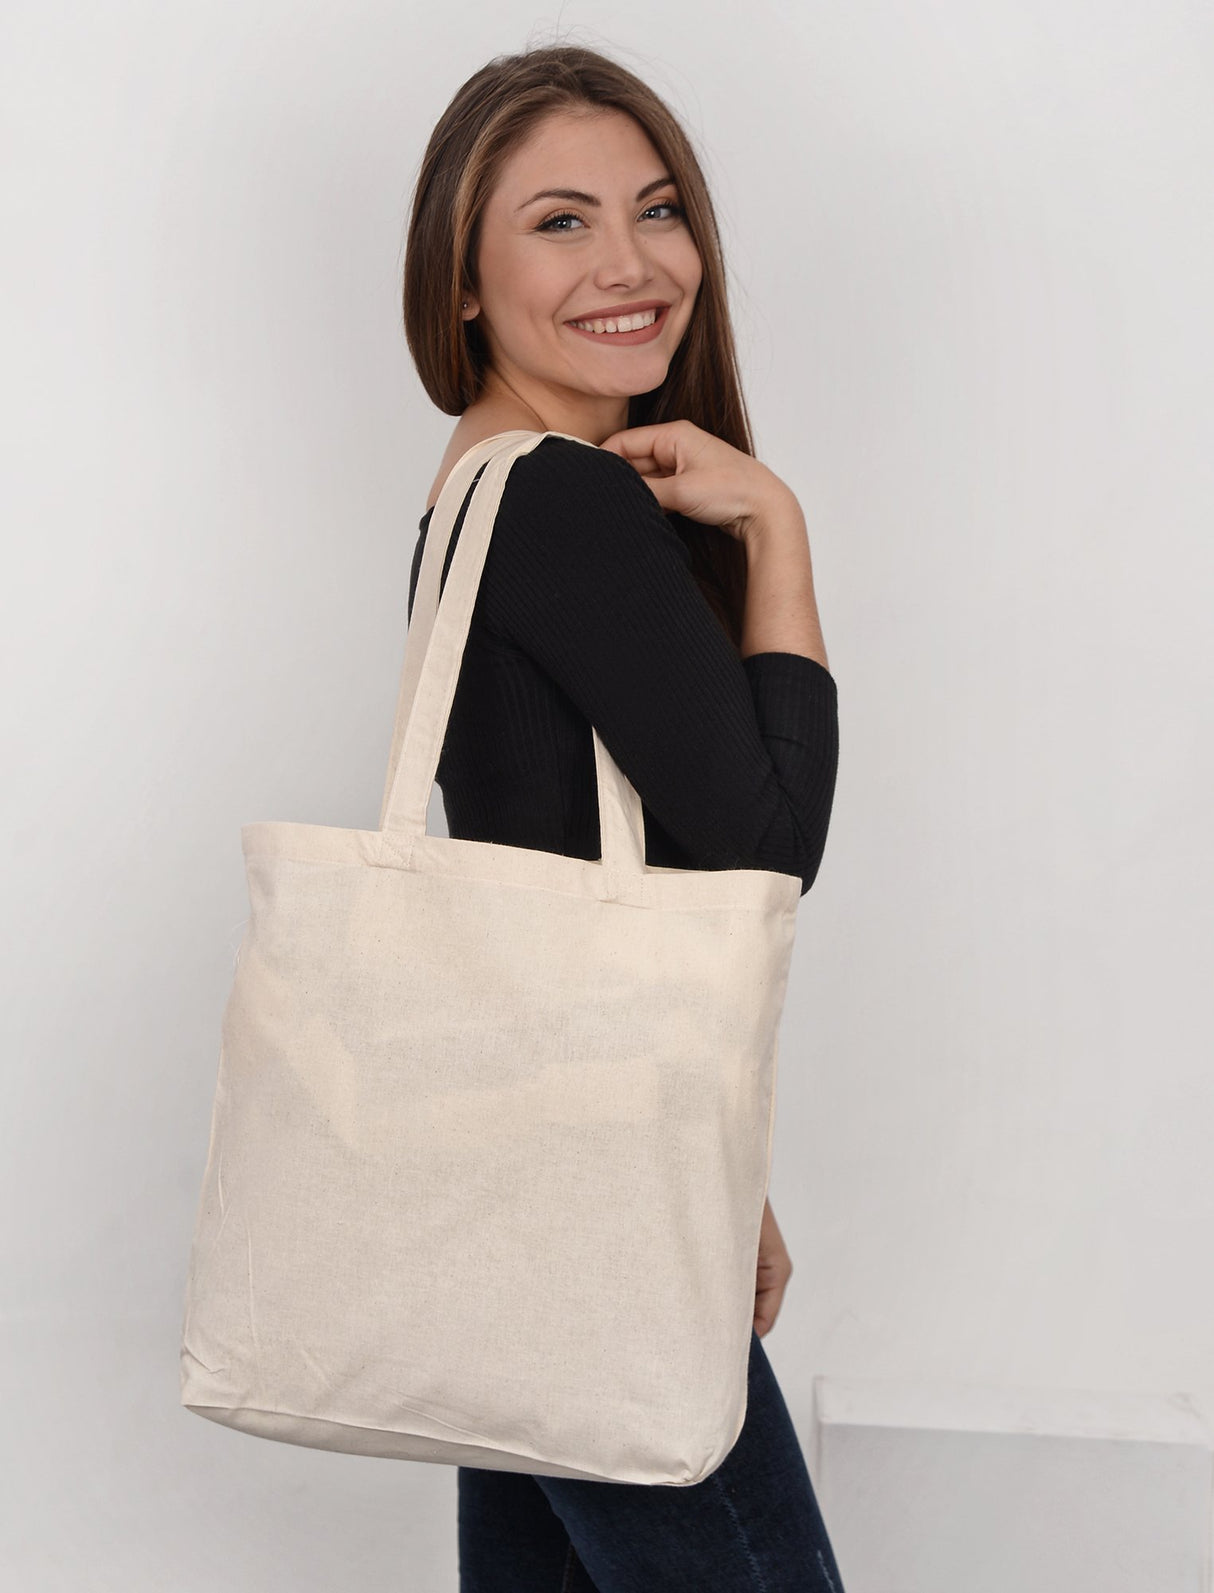 216 ct Over-the-Shoulder Grocery Tote Bags 100% Cotton - By Case